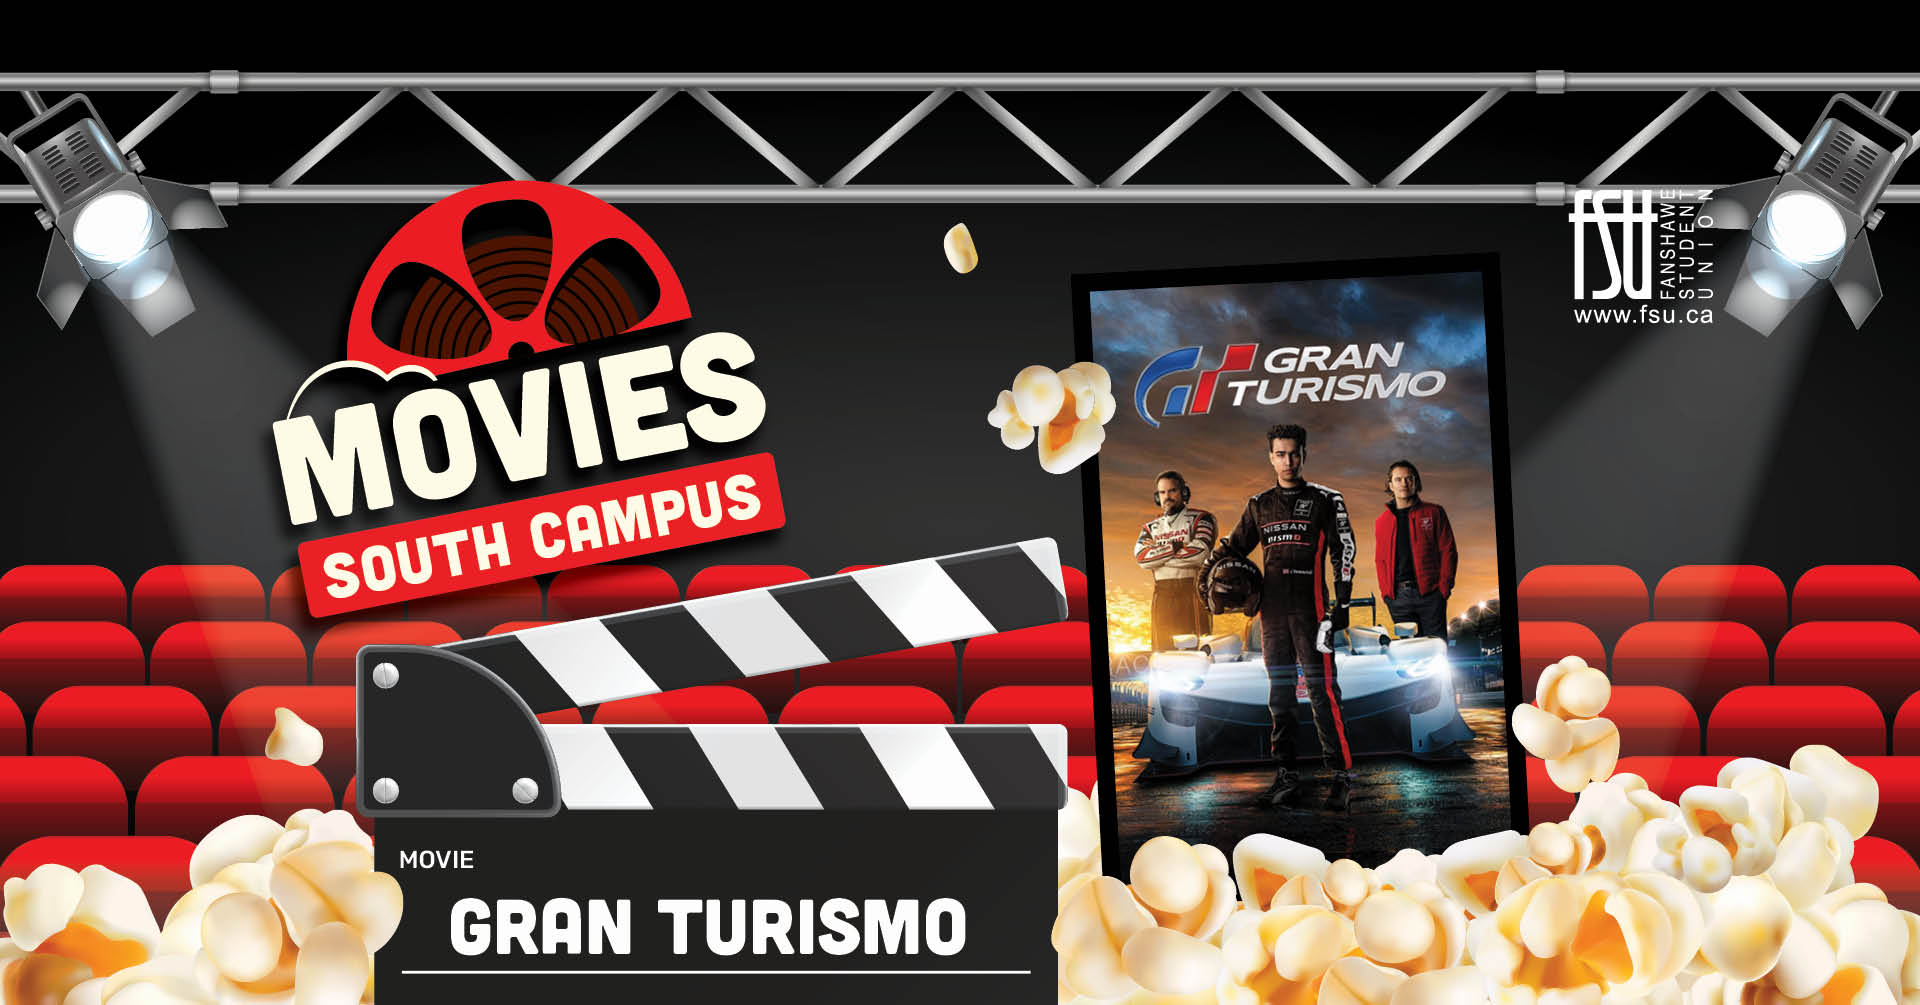 An image showing the Gran Turismo movie poster and an illustration of popcorn. Text states: FSU Movies. South Campus. Third Floor Lounge. Gran Turismo. January 25. 1 p.m. to 3 p.m.